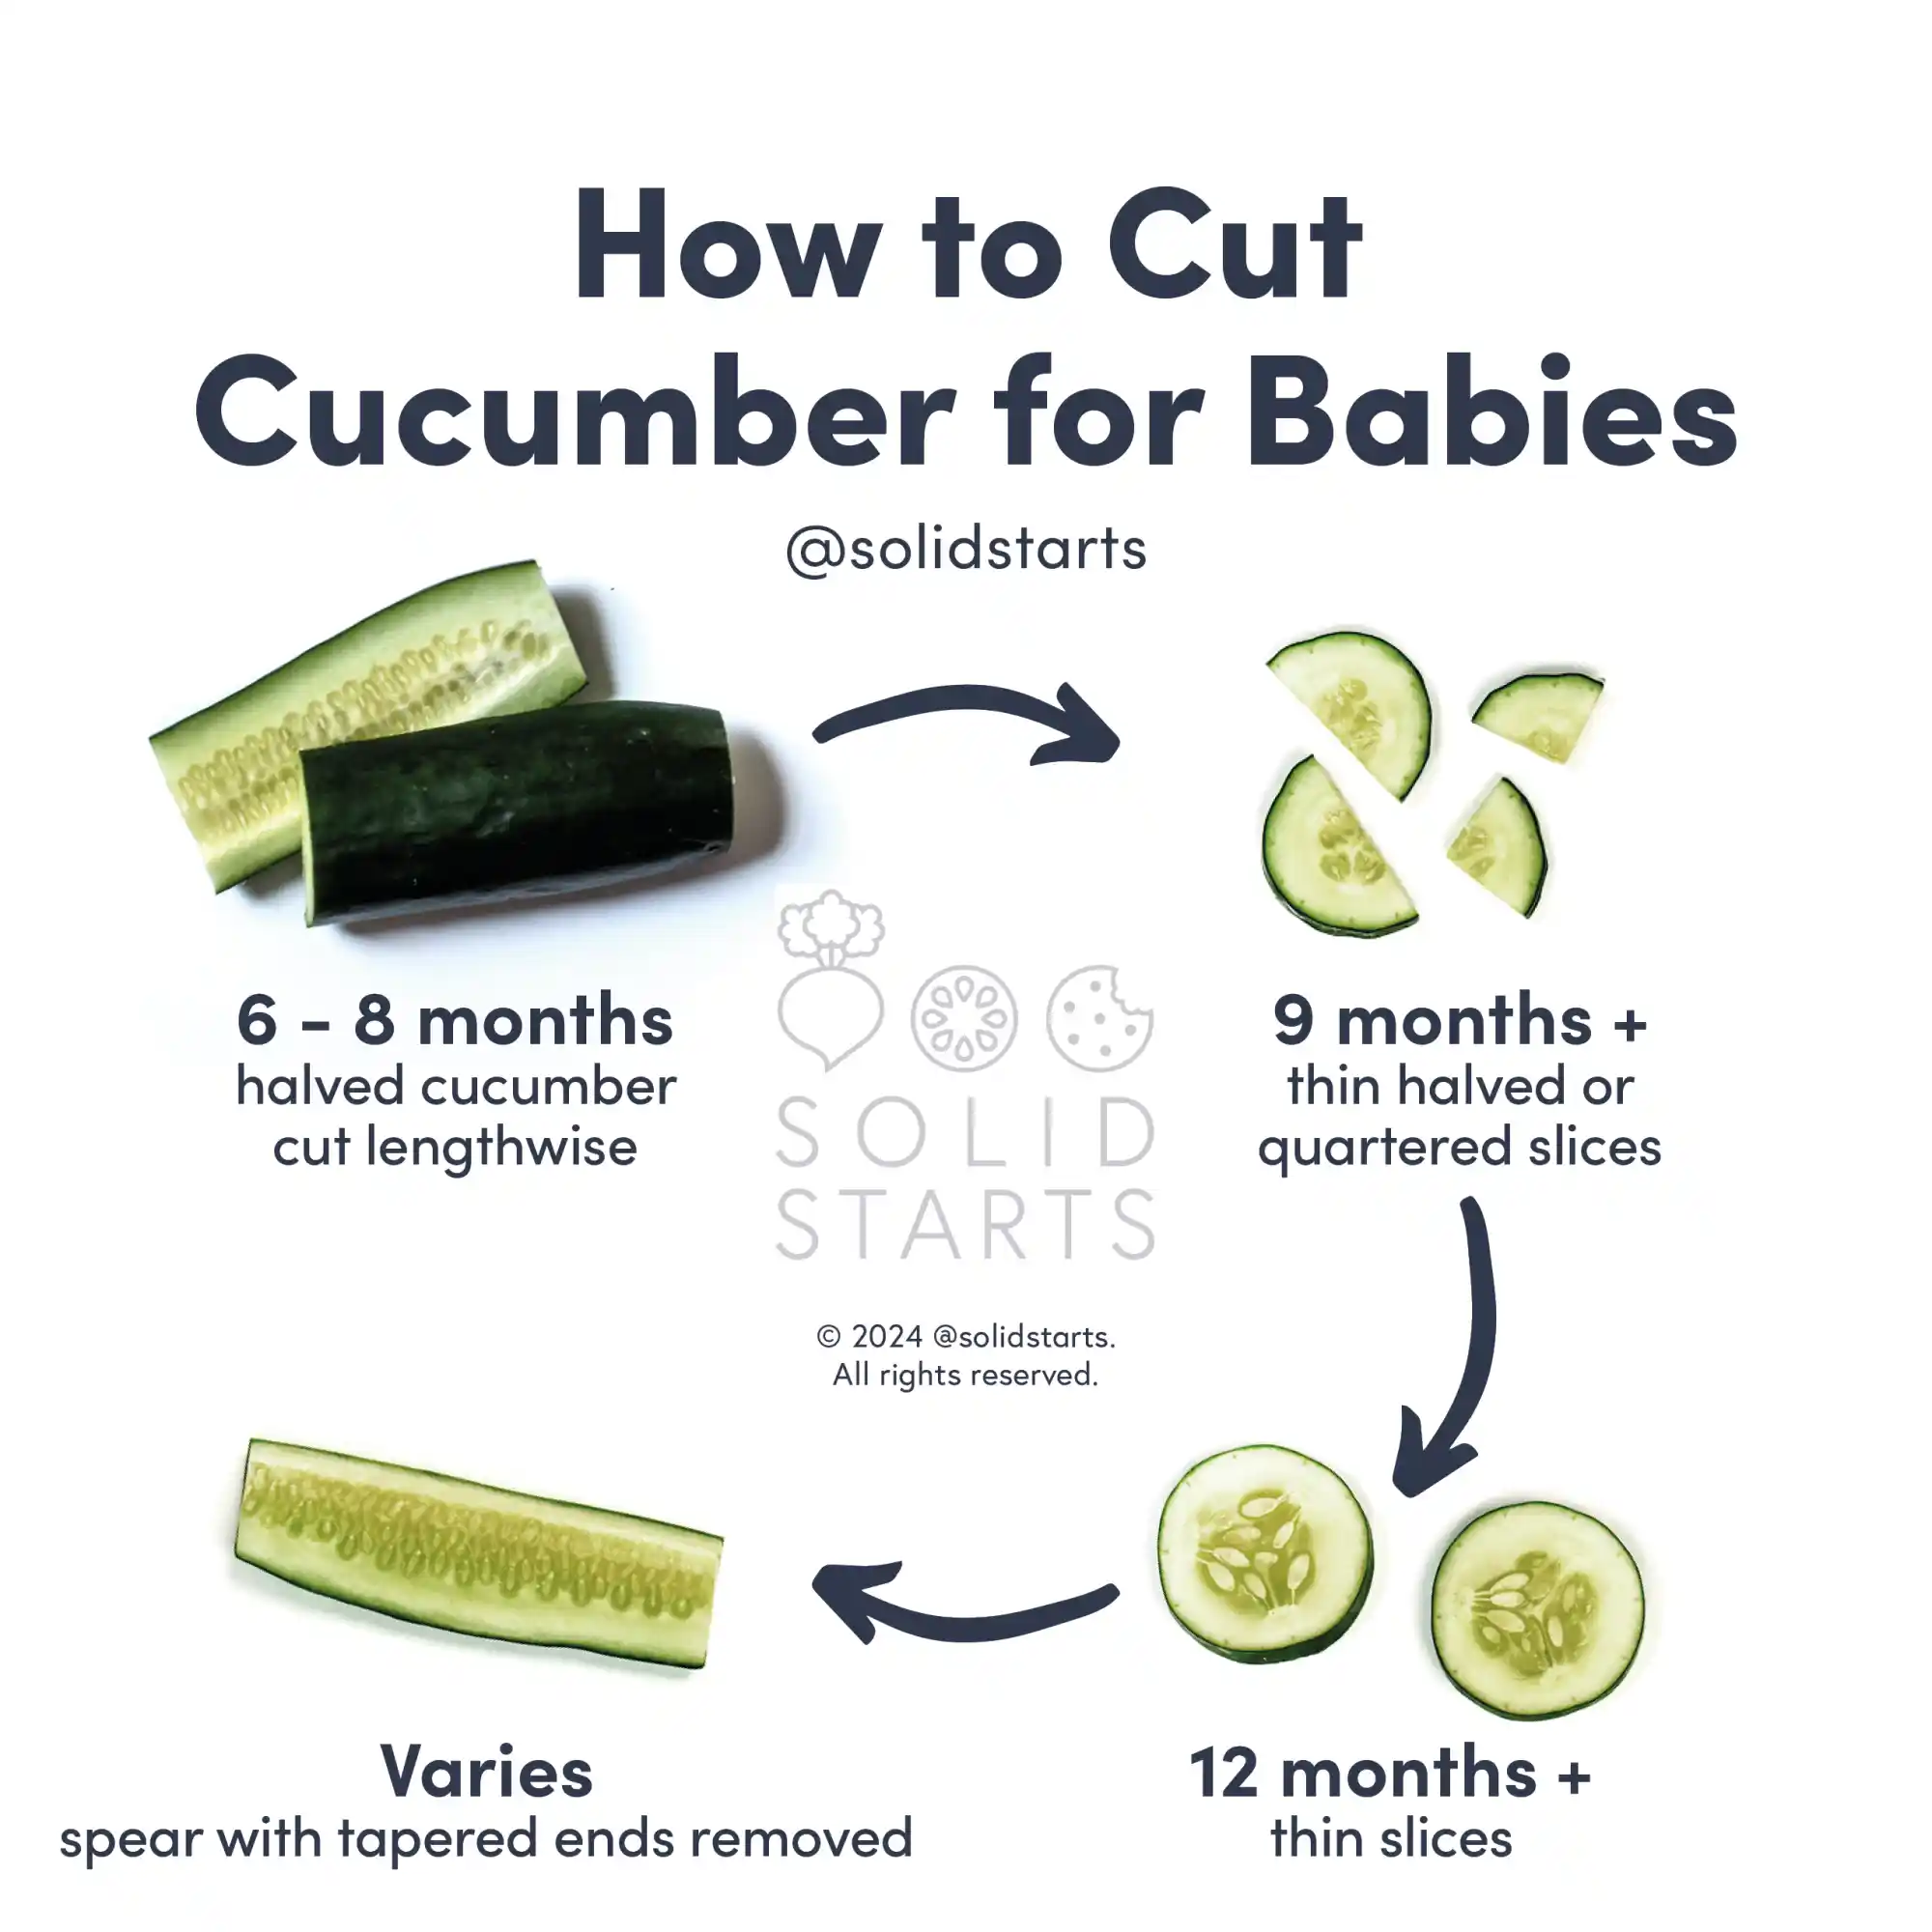 a Solid Starts infographic with the header How to Cut Cucumber for Babies: halved cucumbers cut lengthwise for 6-8 mos, thin slices halved or quartered for 9 mos+, thin slices for 12 mos+, spears with ends removed, age varies